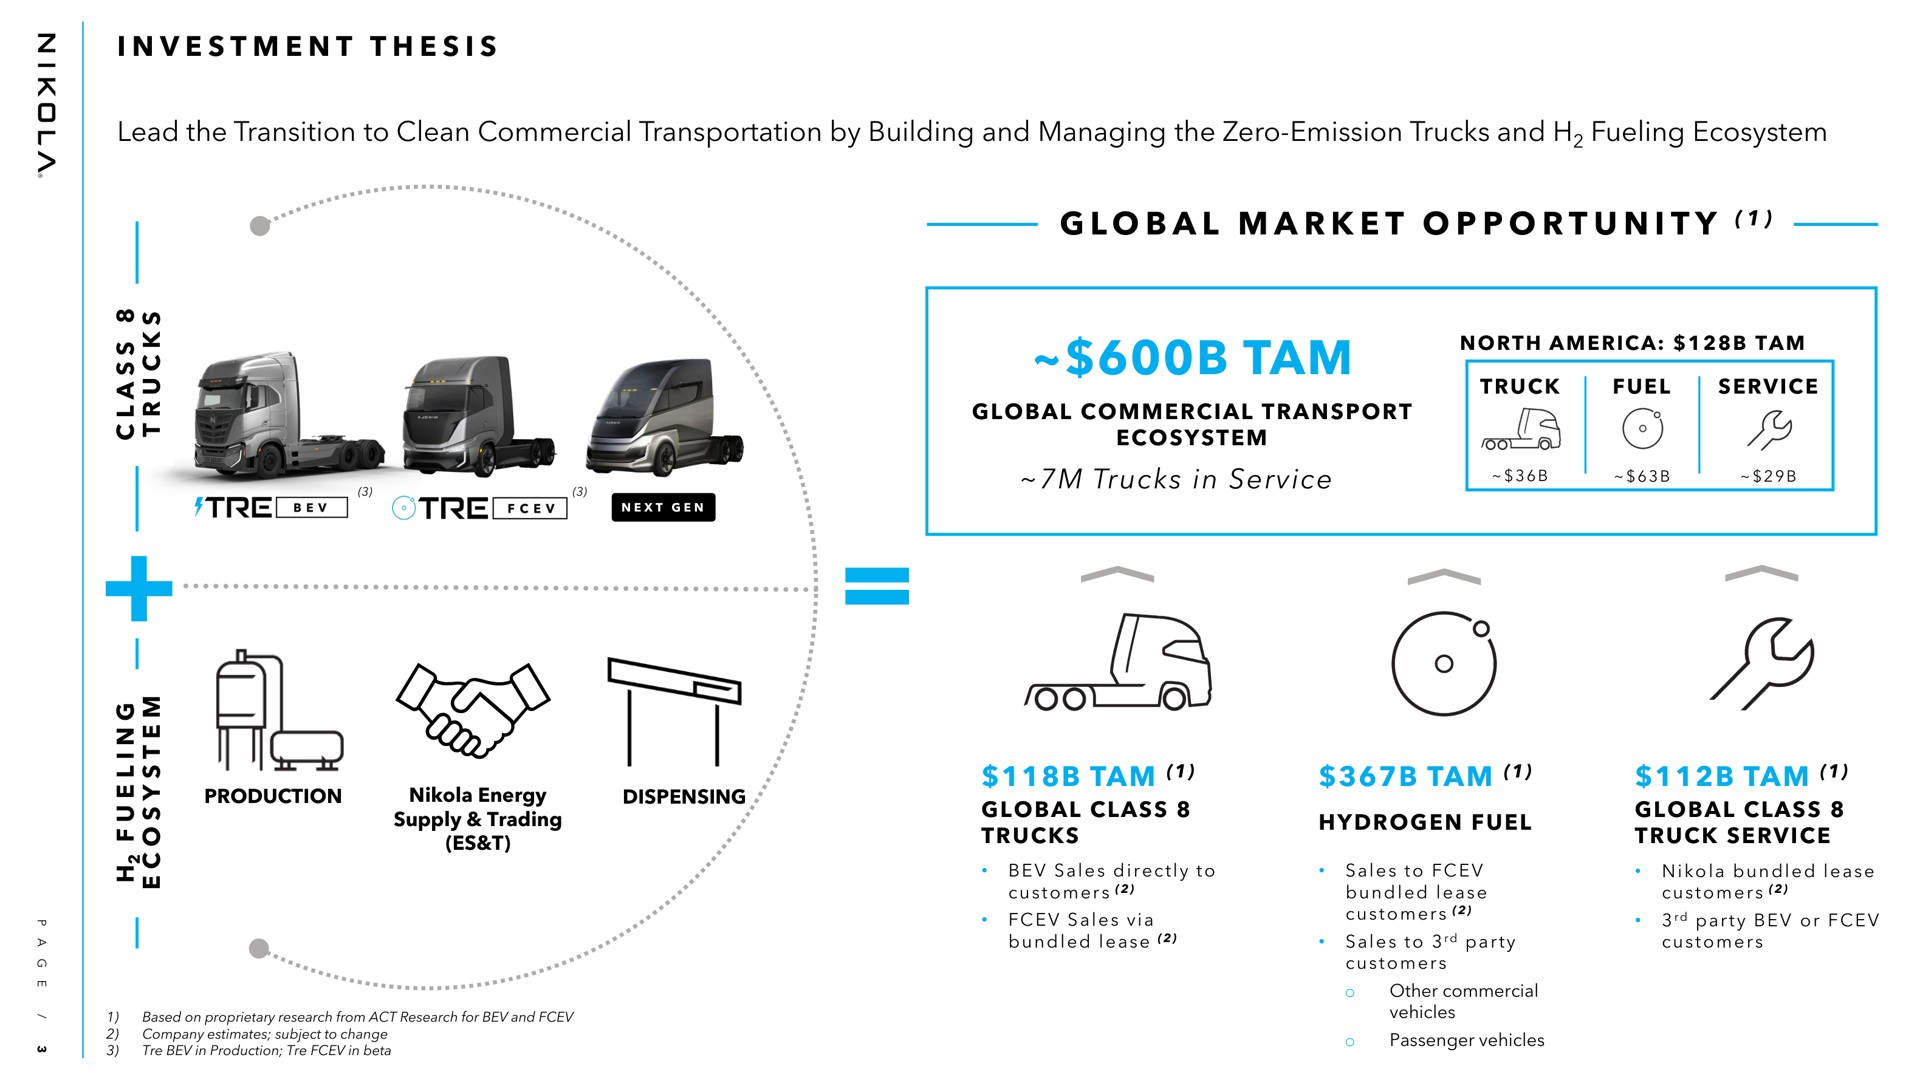 i i lead the transition to clean commercial transportation by building and managing the zero emission trucks and fueling ecosystem a a i tam trucks in service tam tam tam investment thesis global market opportunity sales via customers party or | Nikola